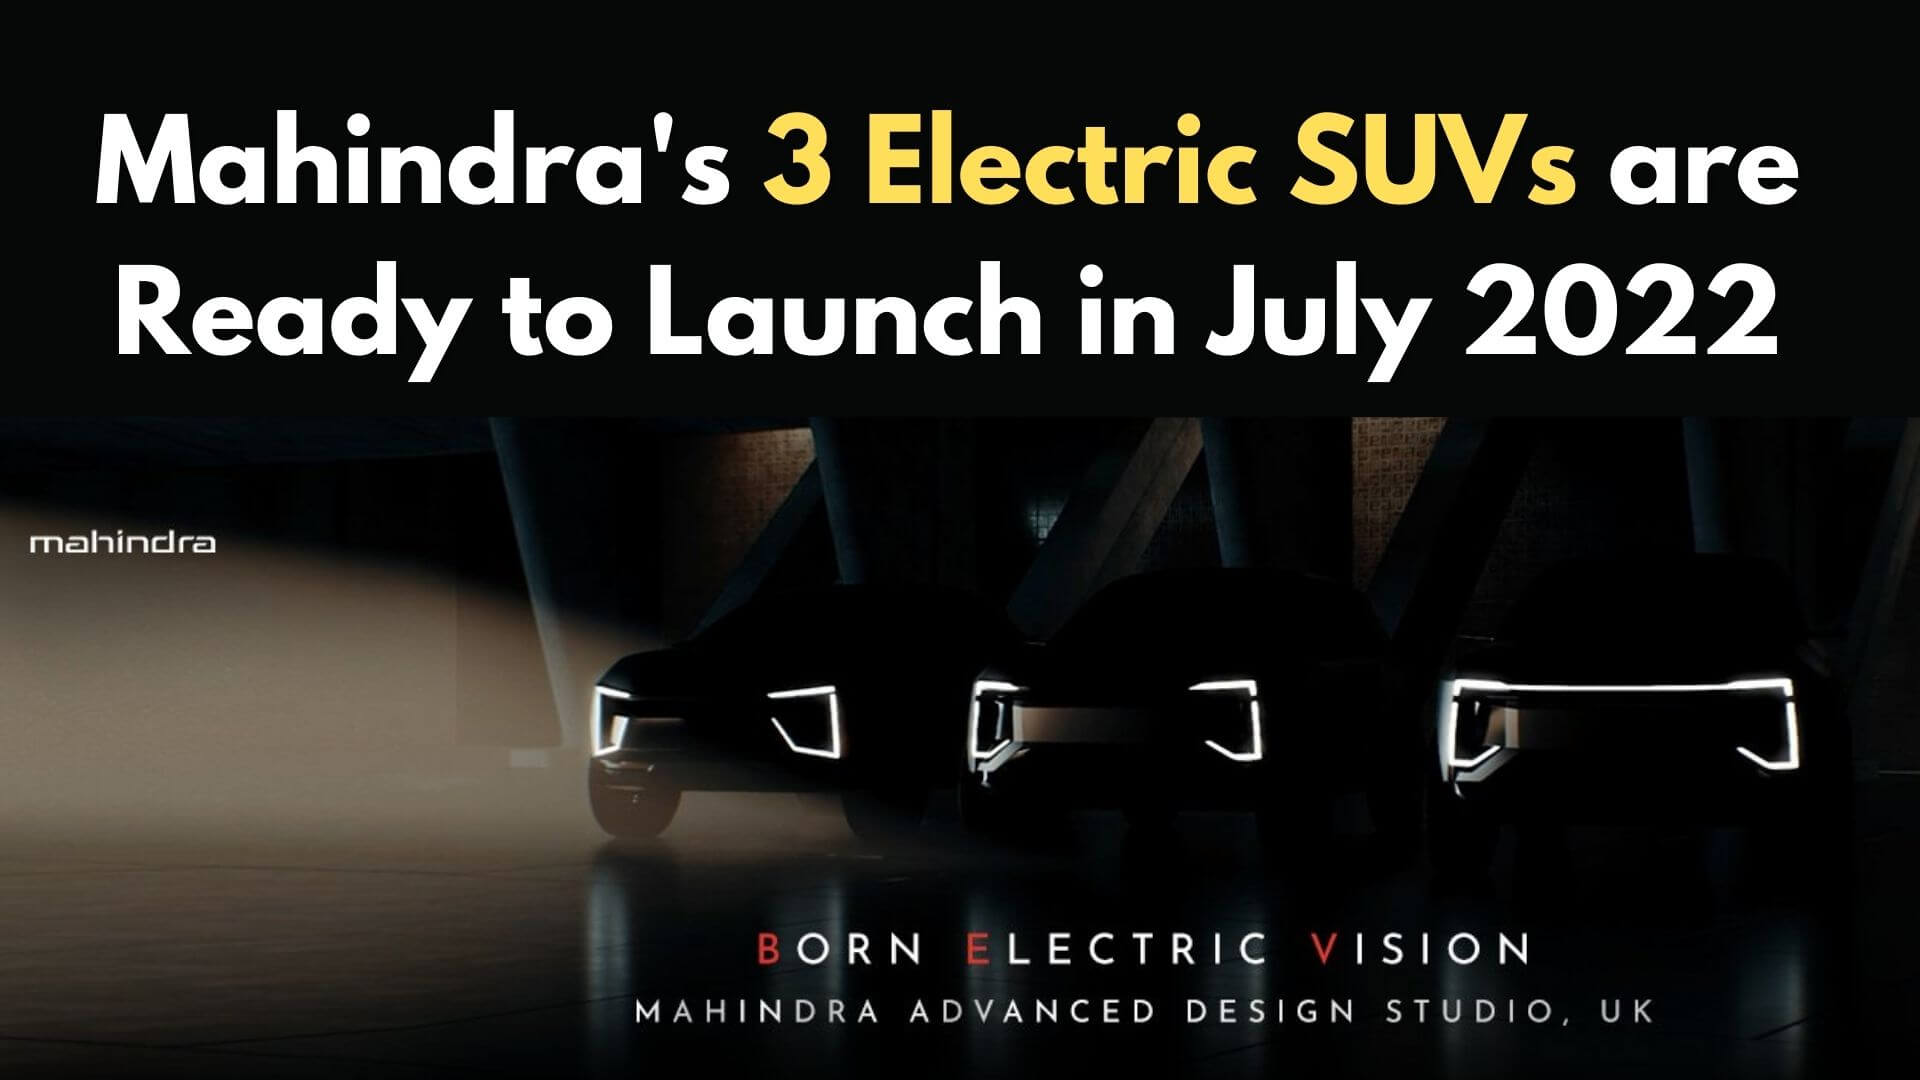 https://e-vehicleinfo.com/mahindras-3-electric-suvs-are-ready-to-launch-in-july-2022/